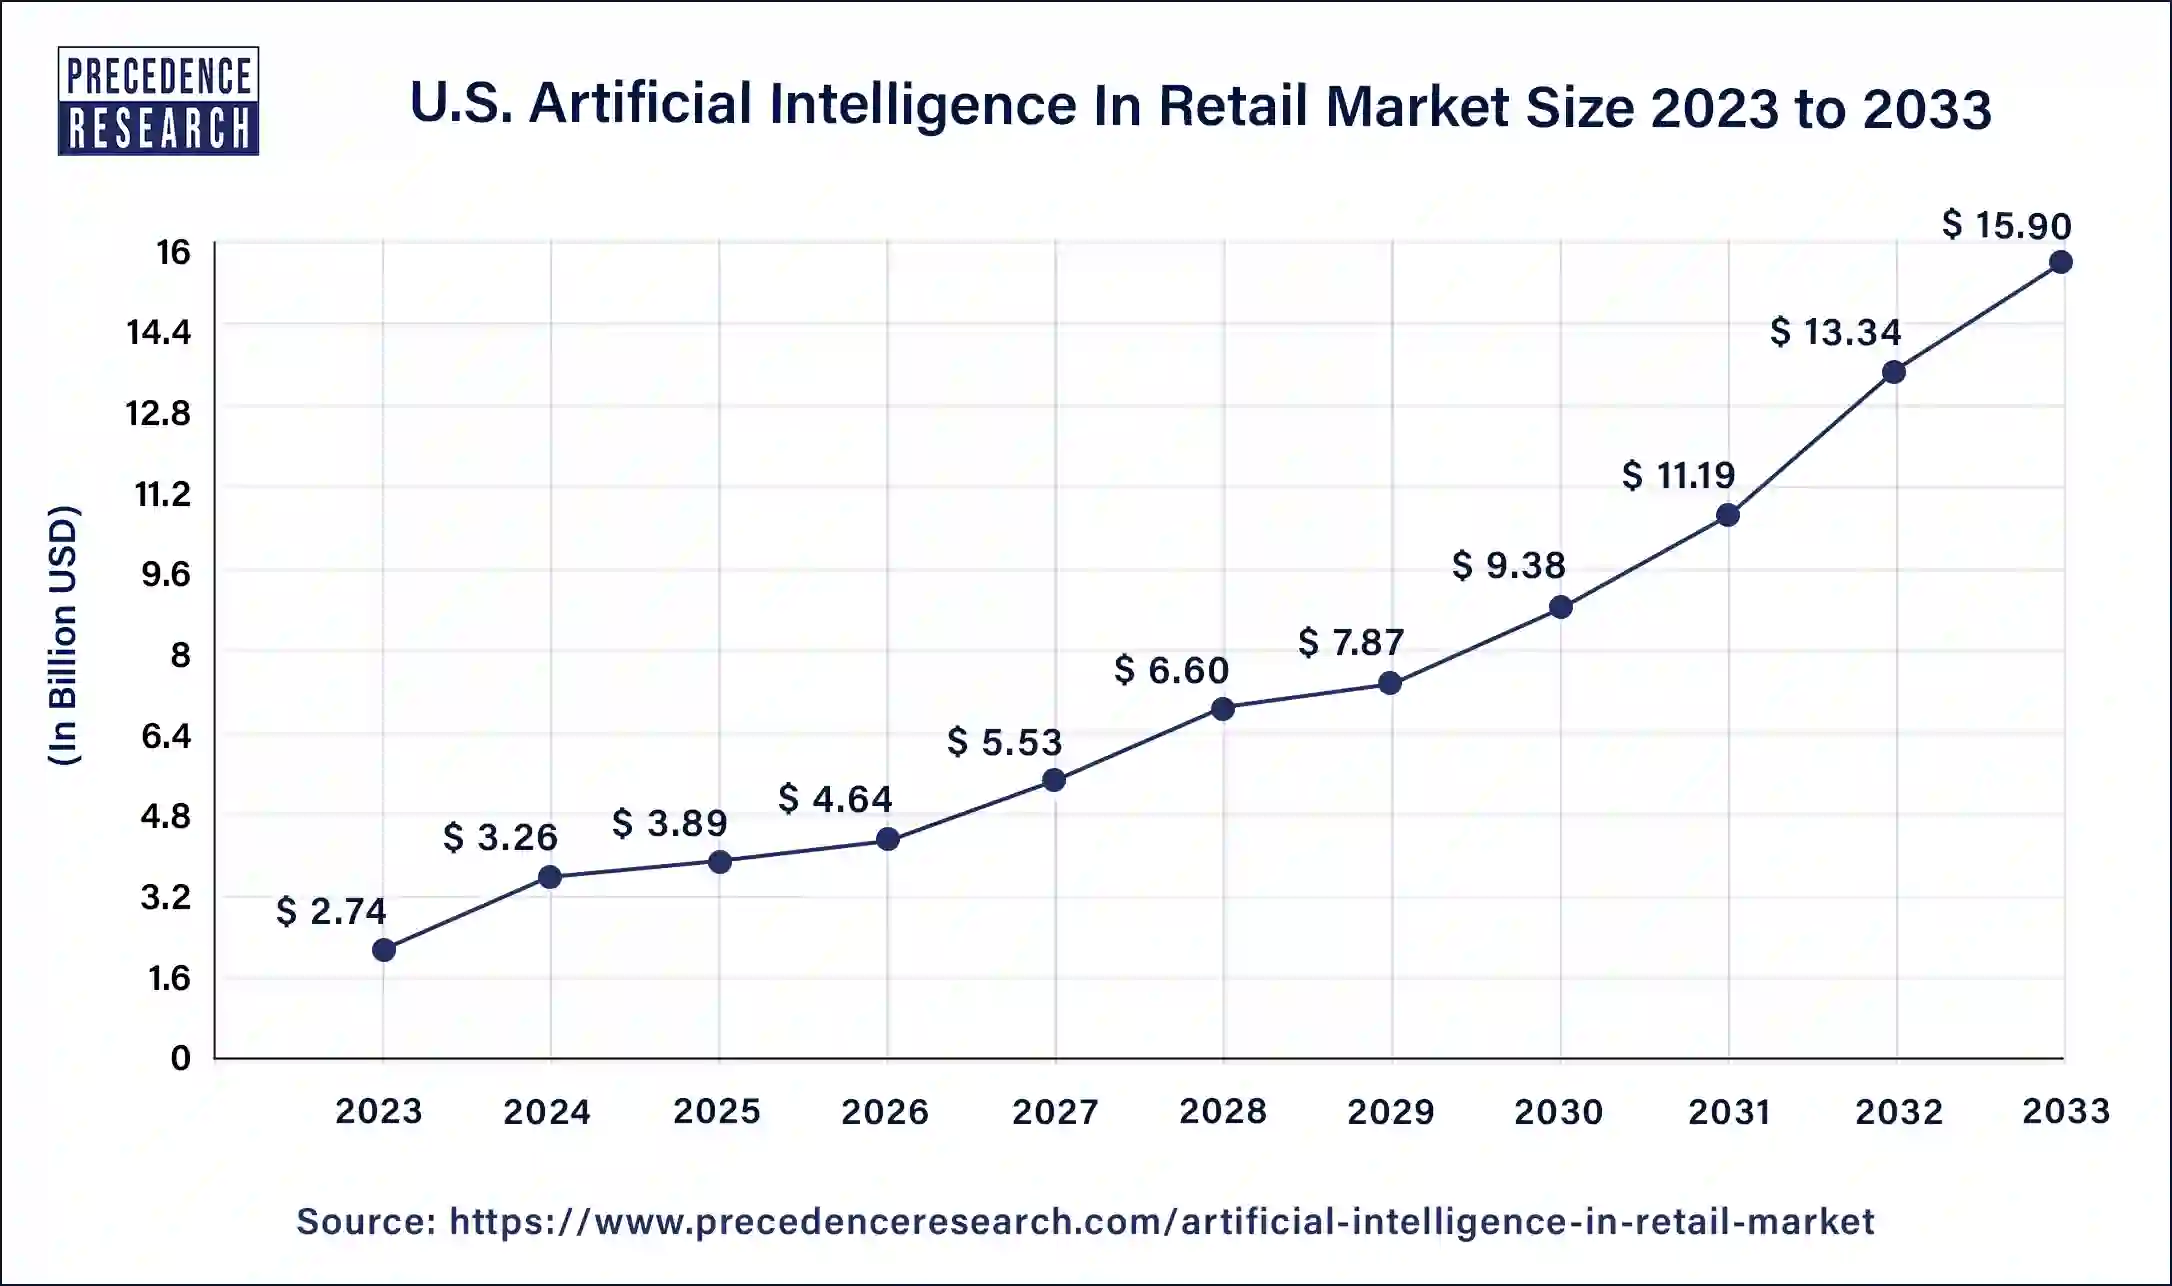 U.S. Artificial Intelligence In Retail Market Size 2024 to 2033